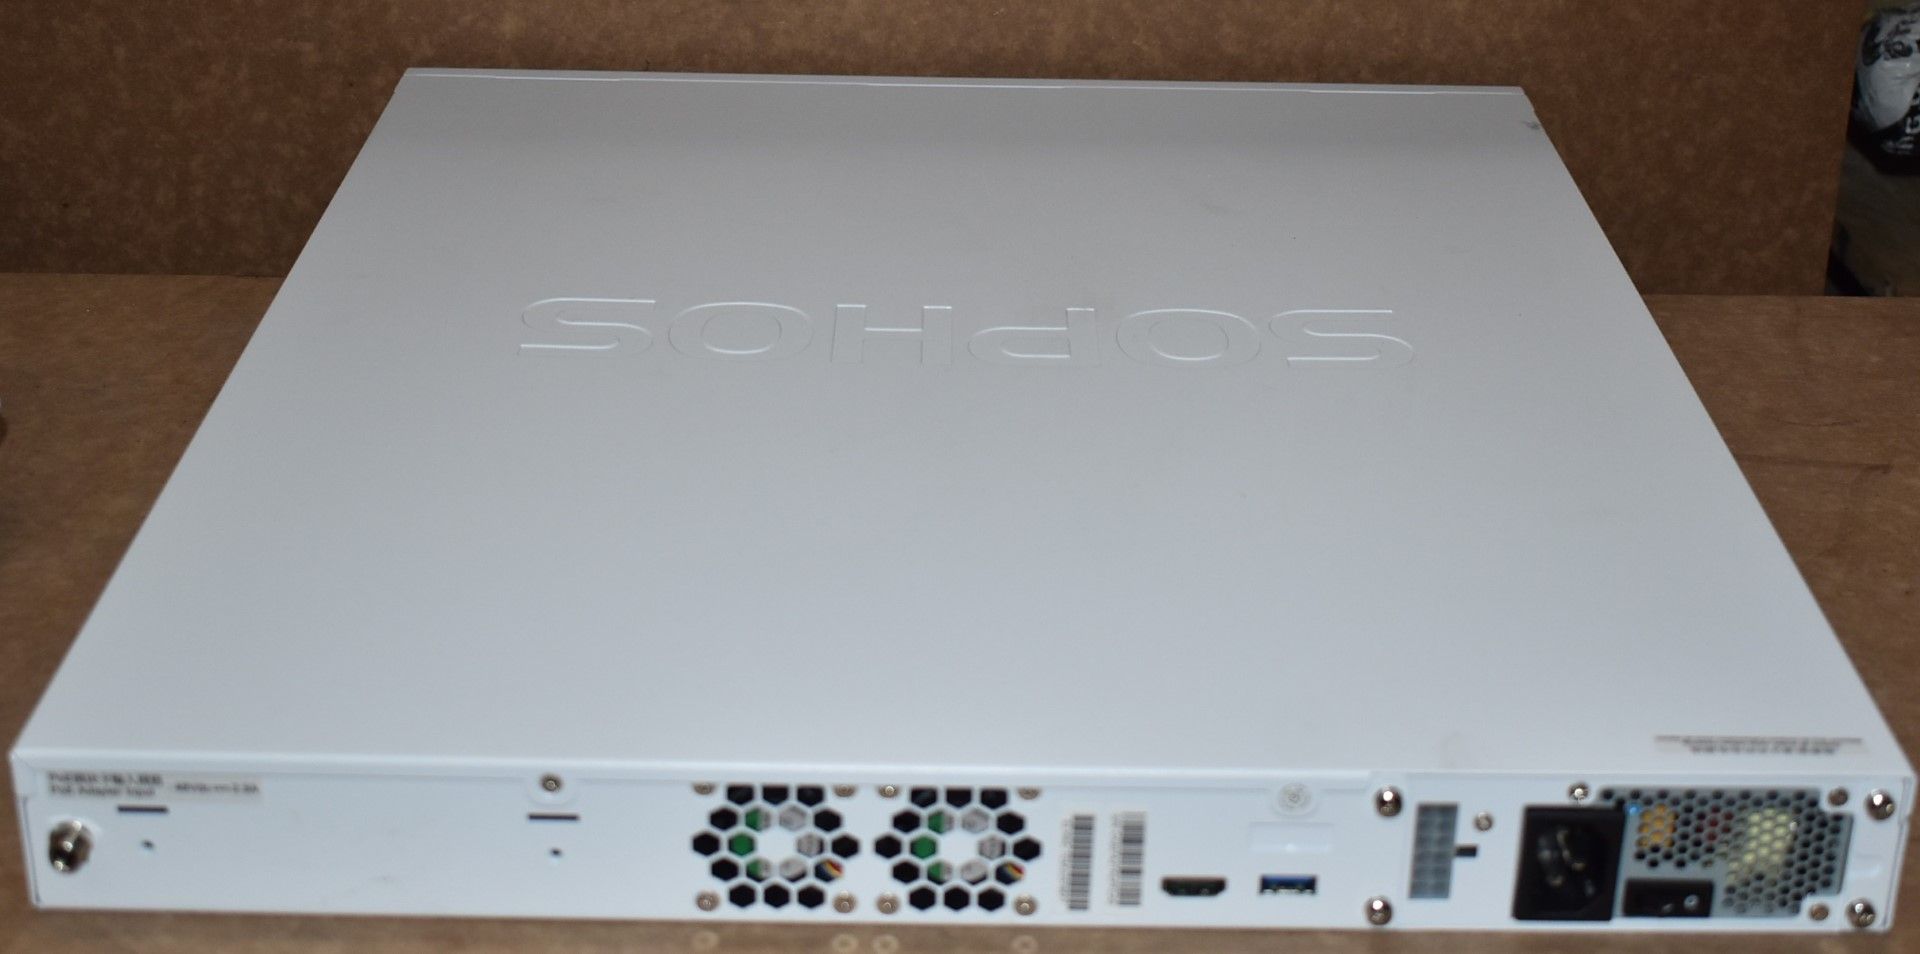 1 x Sophos XG430 Edge Firewall Appliance - Rev2 - Manufactured Jan 2019 - Includes Power Cable - - Image 9 of 11